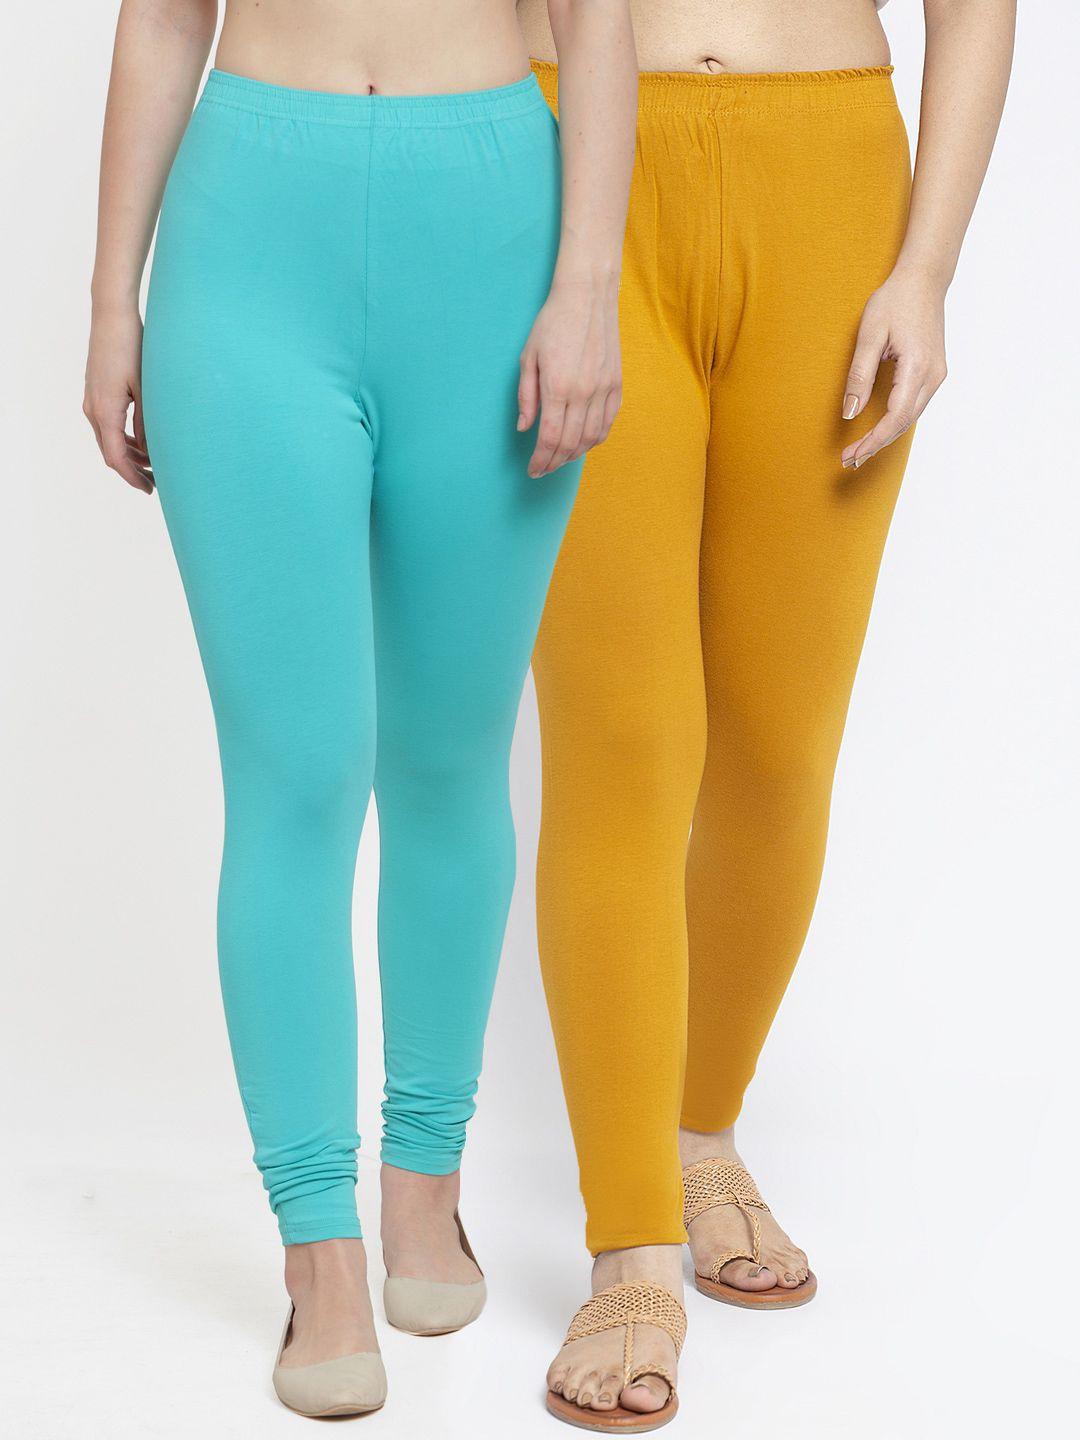 gracit women pack of 2 mustard yellow & sea green solid ankle length leggings